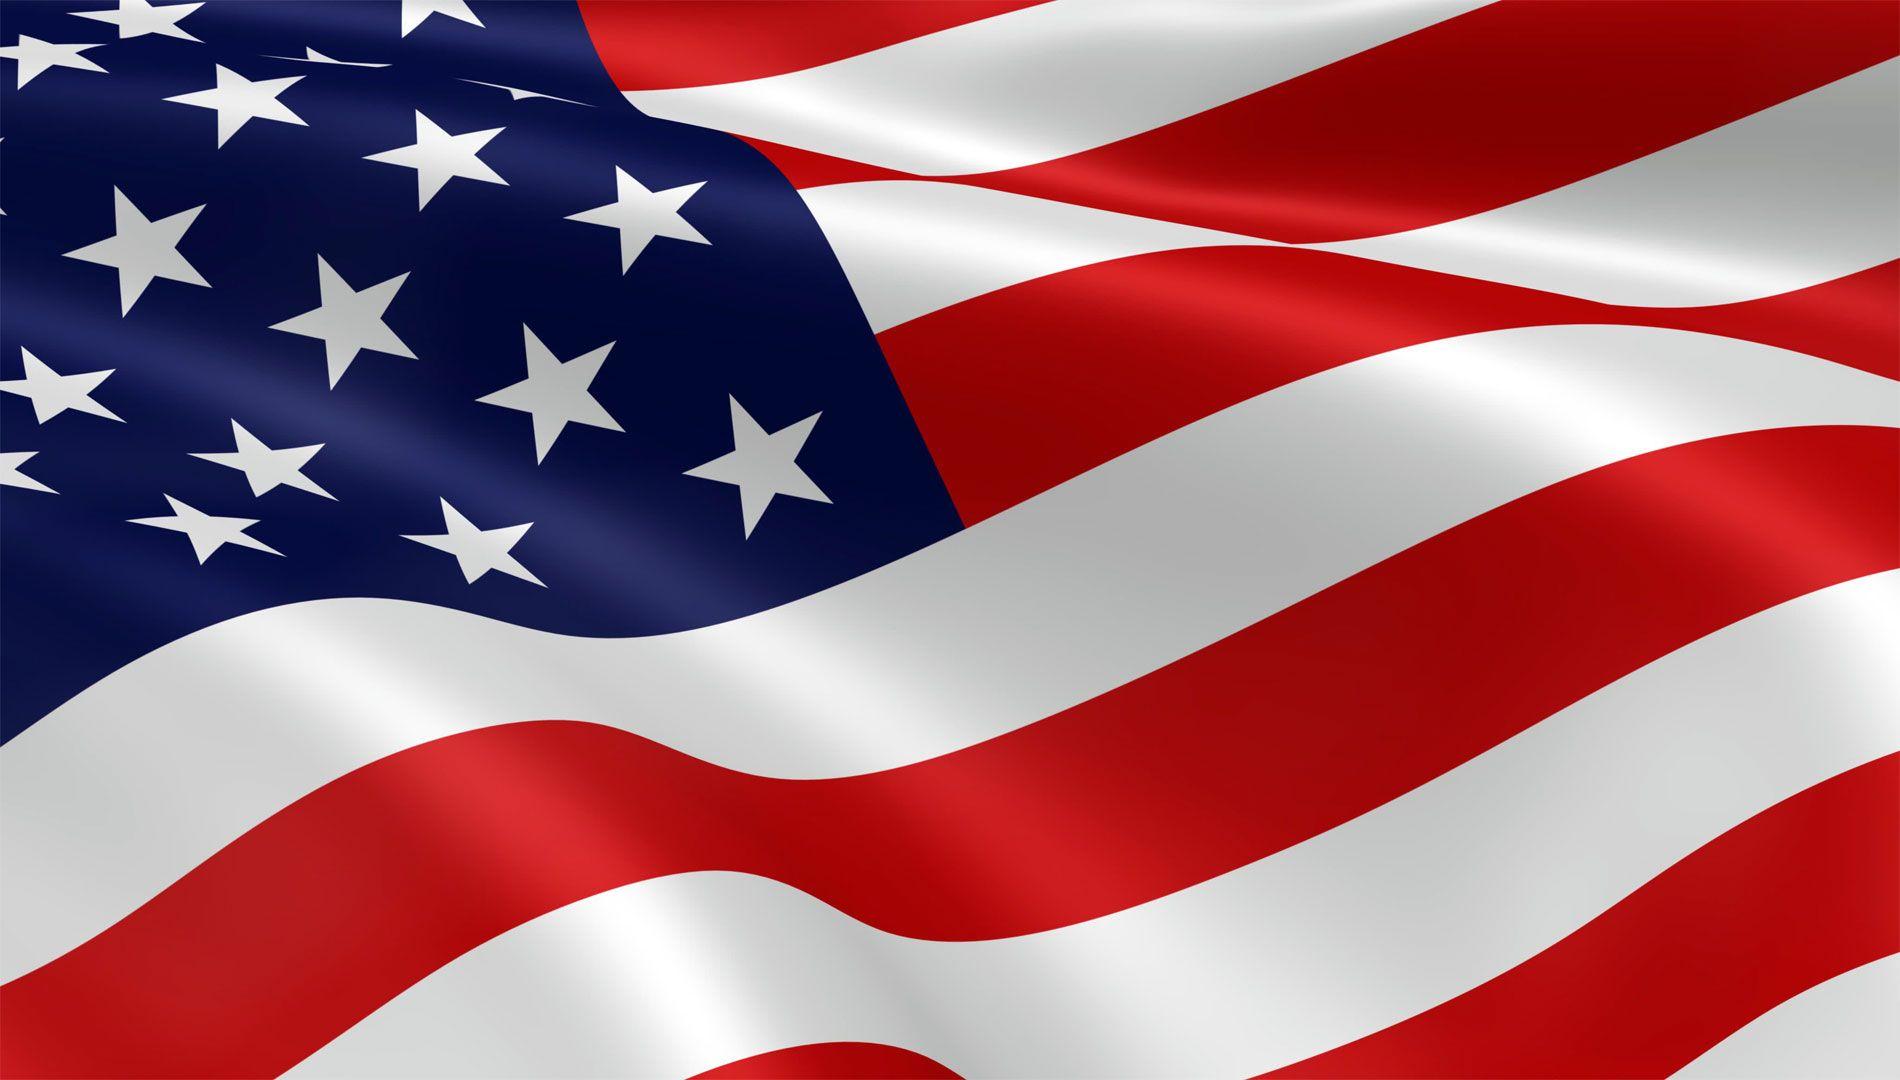 American Flag HD Image and Wallpaper Free Download